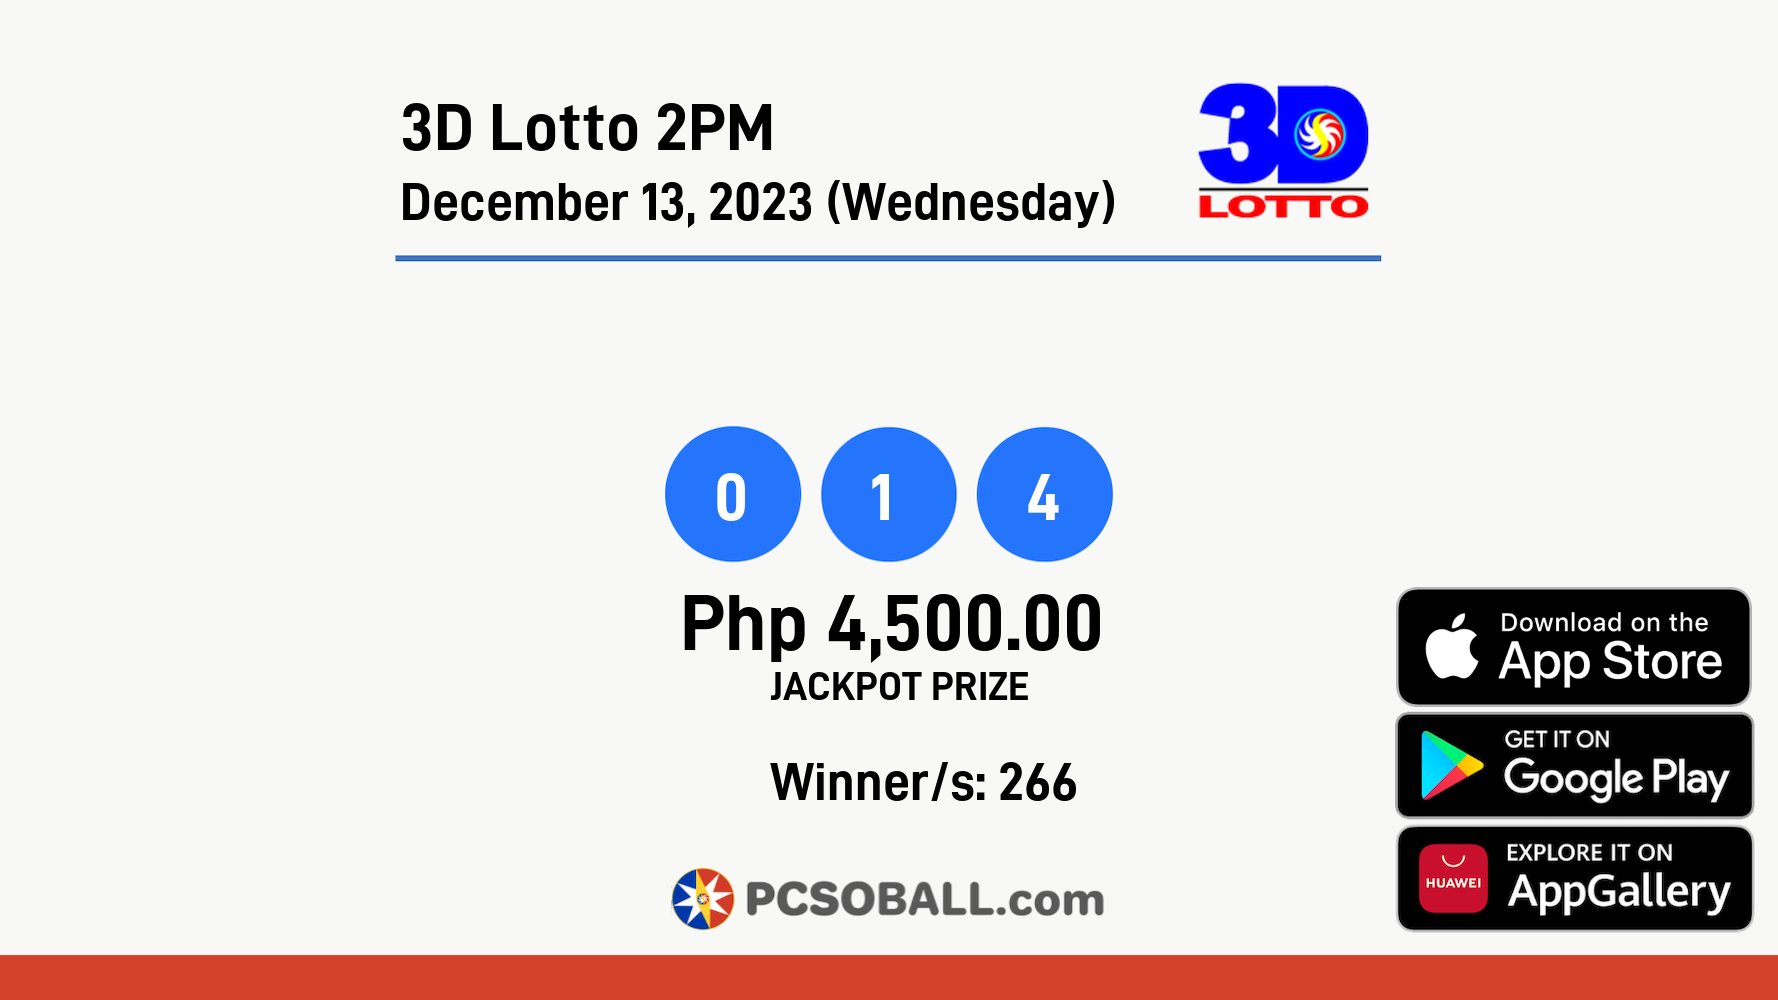 3D Lotto 2PM December 13, 2023 (Wednesday) Result